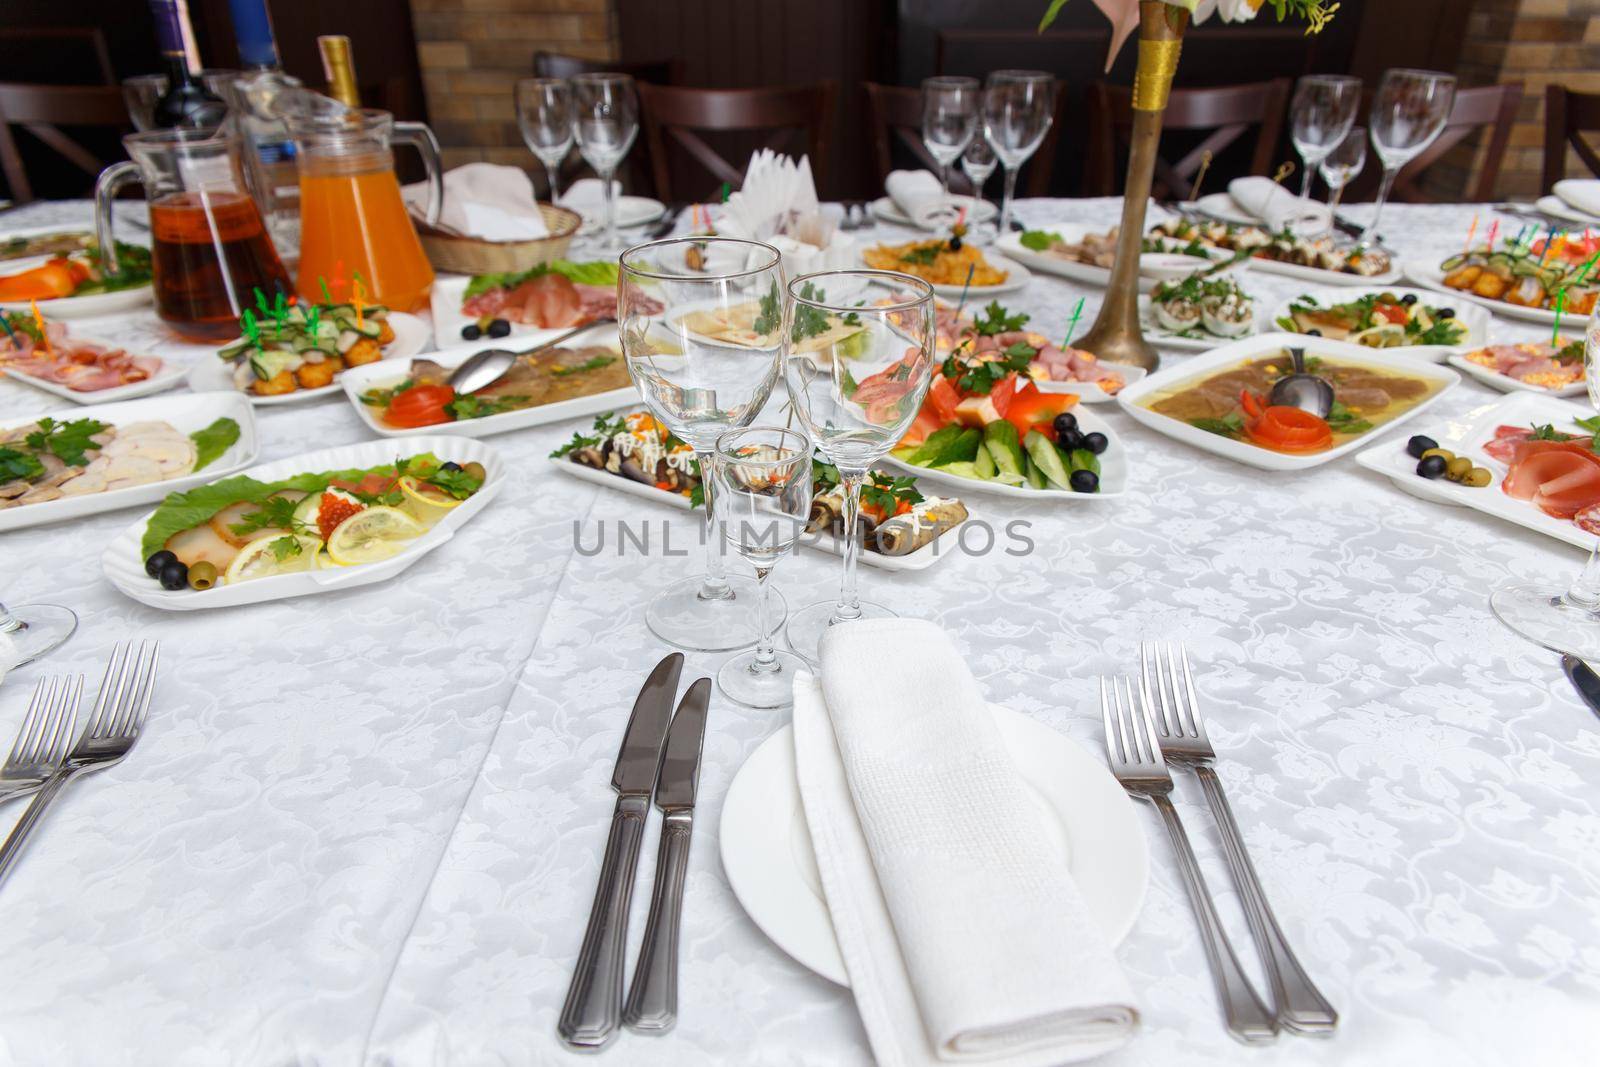 Table set for wedding or another catered event dinner. Concept: Serving. Celebration. Anniversary. Wedding